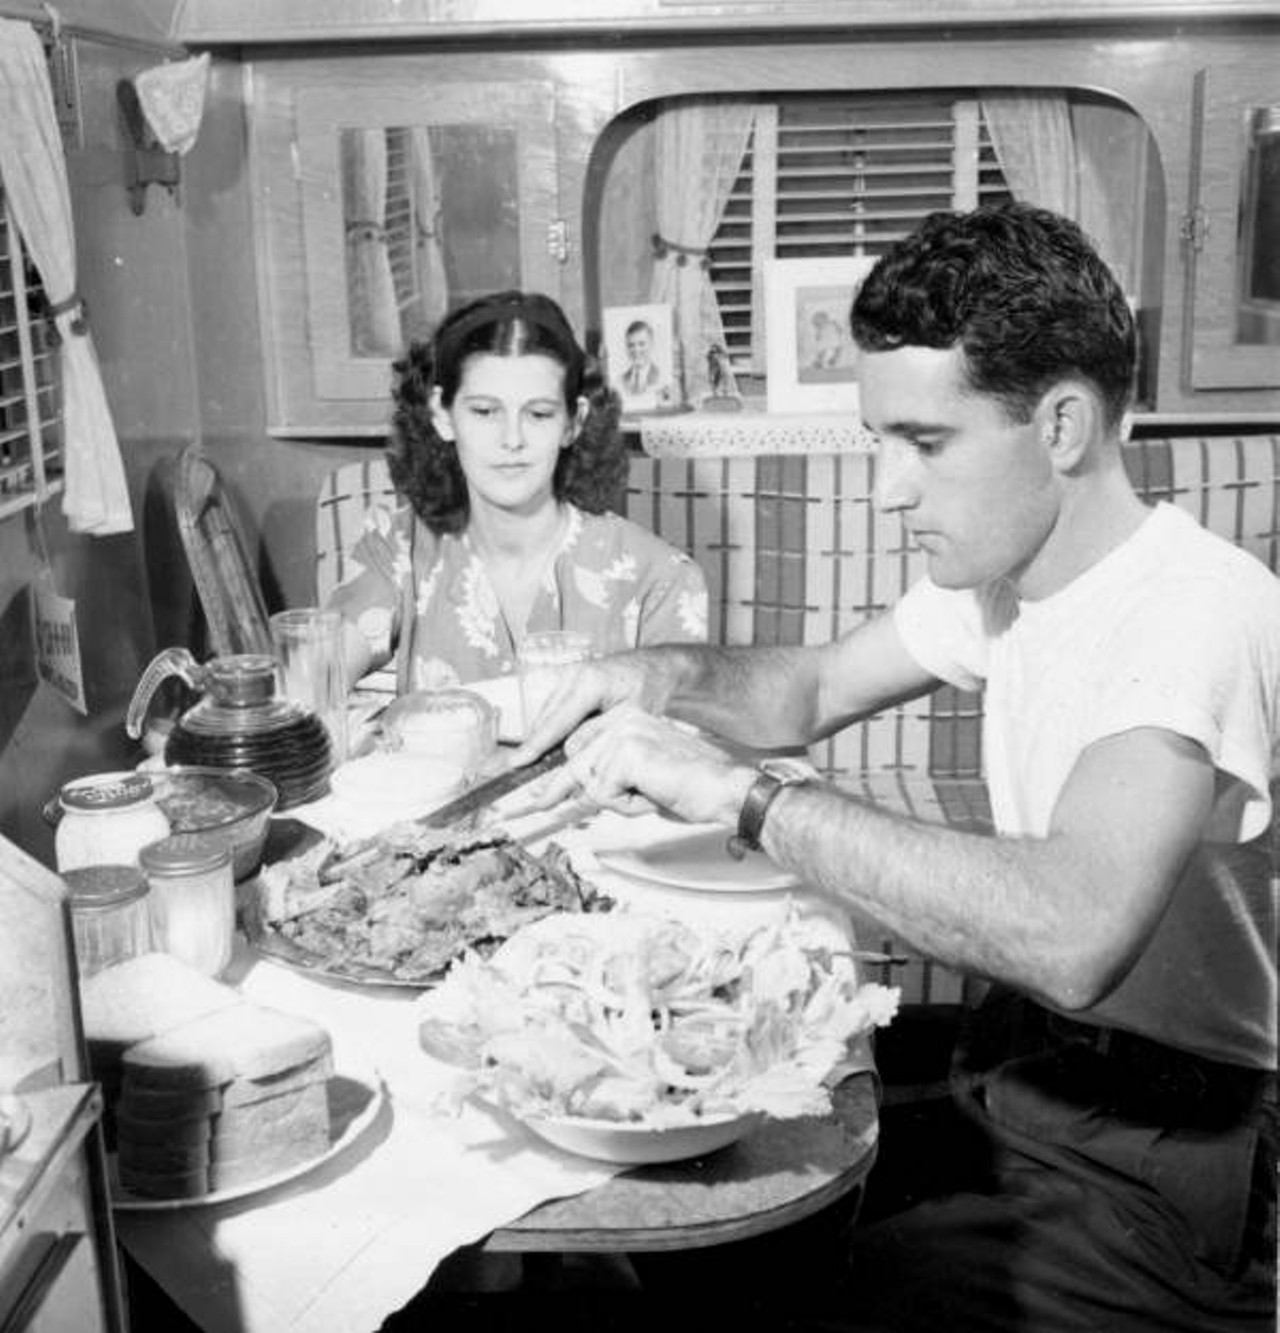 Having a meal in a trailer in Everglades National Park, 1946